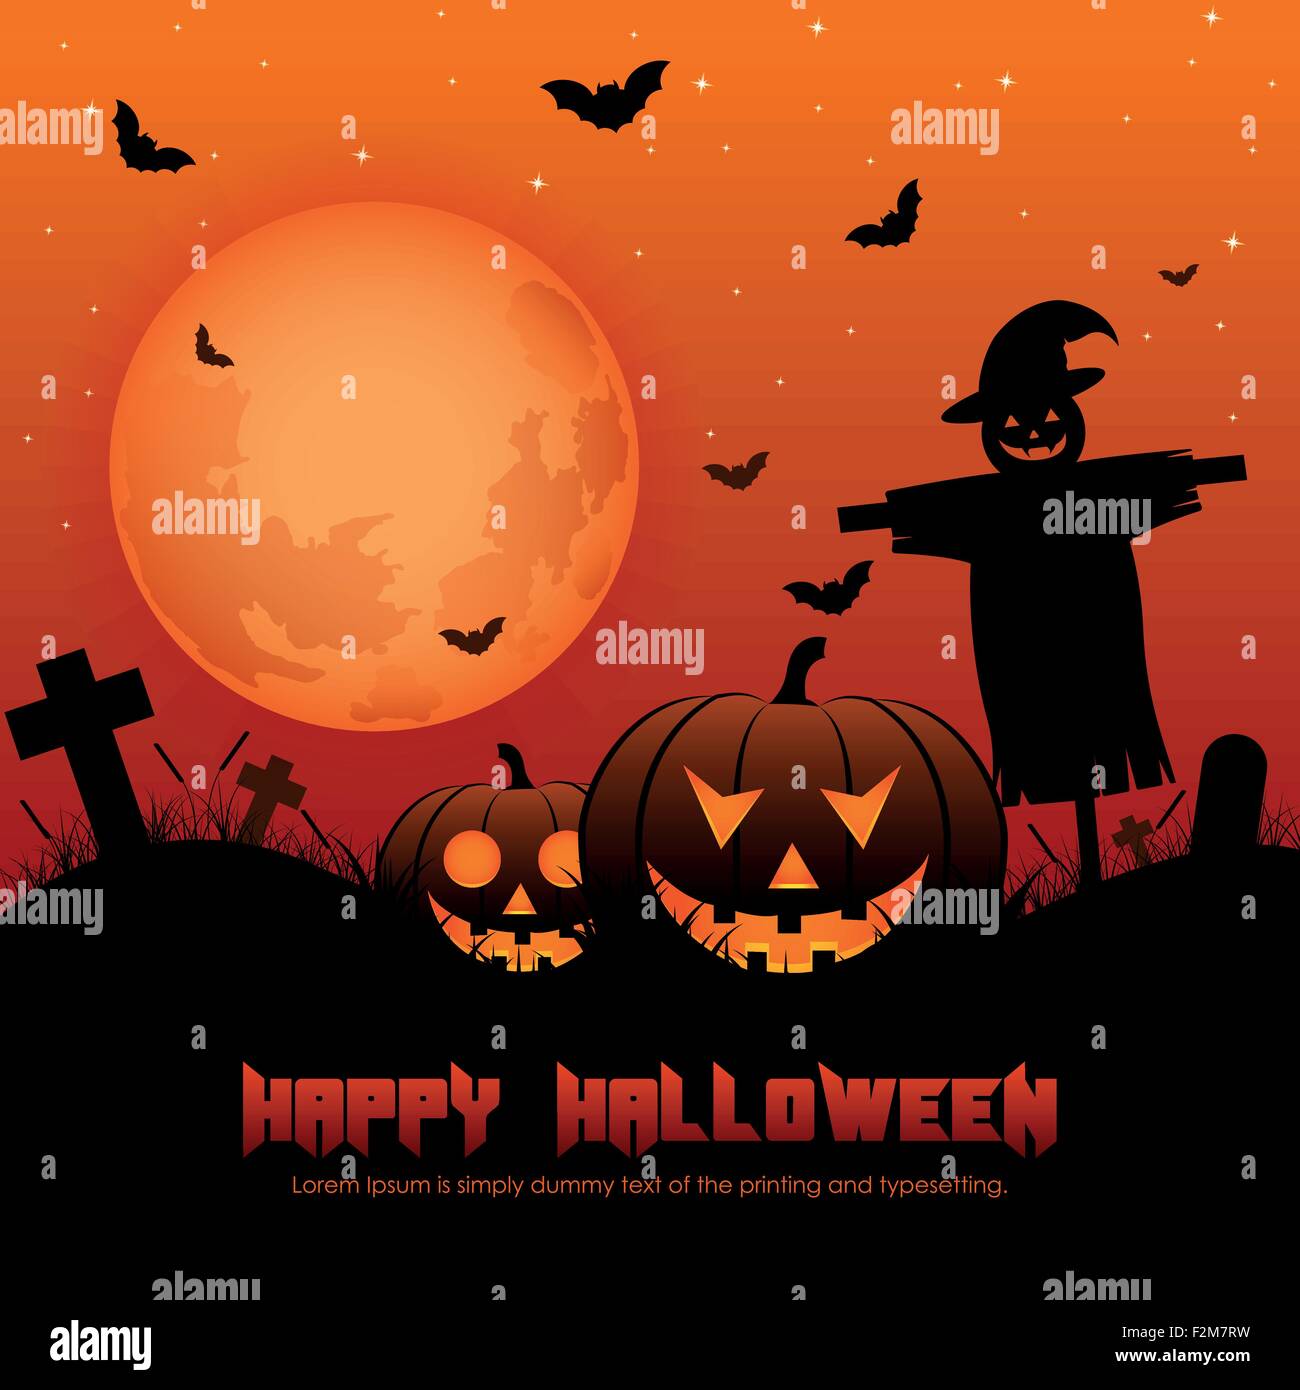 Halloween background with silhouettes,Vector Illustration Stock Vector ...